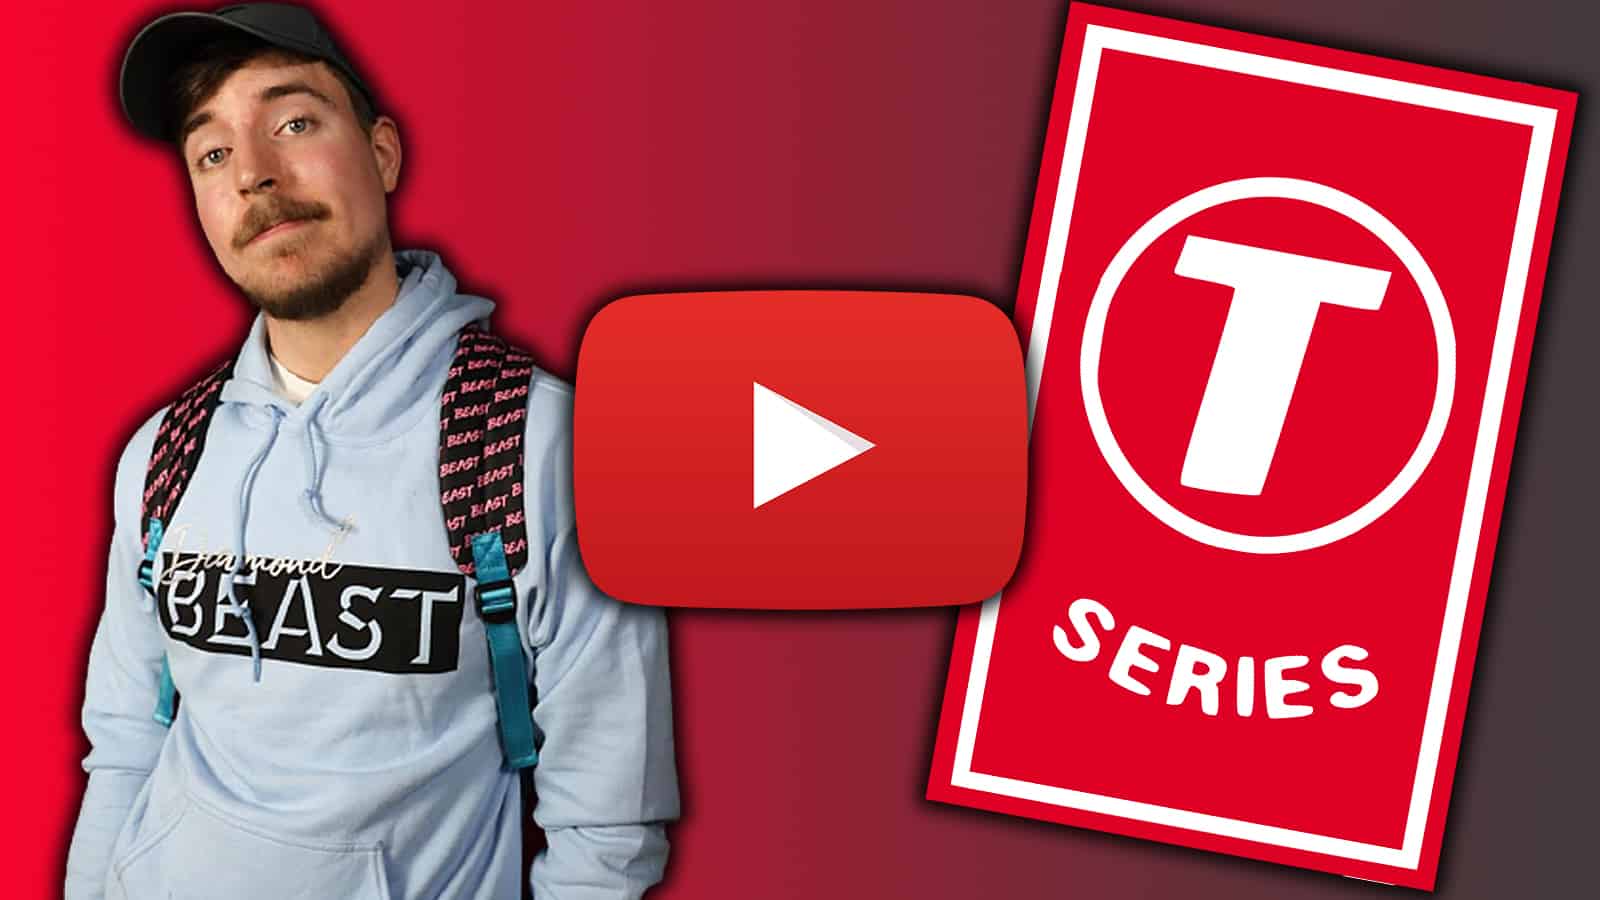 PewDiePie Vs. T-Series War – What Your Brand Can Learn?